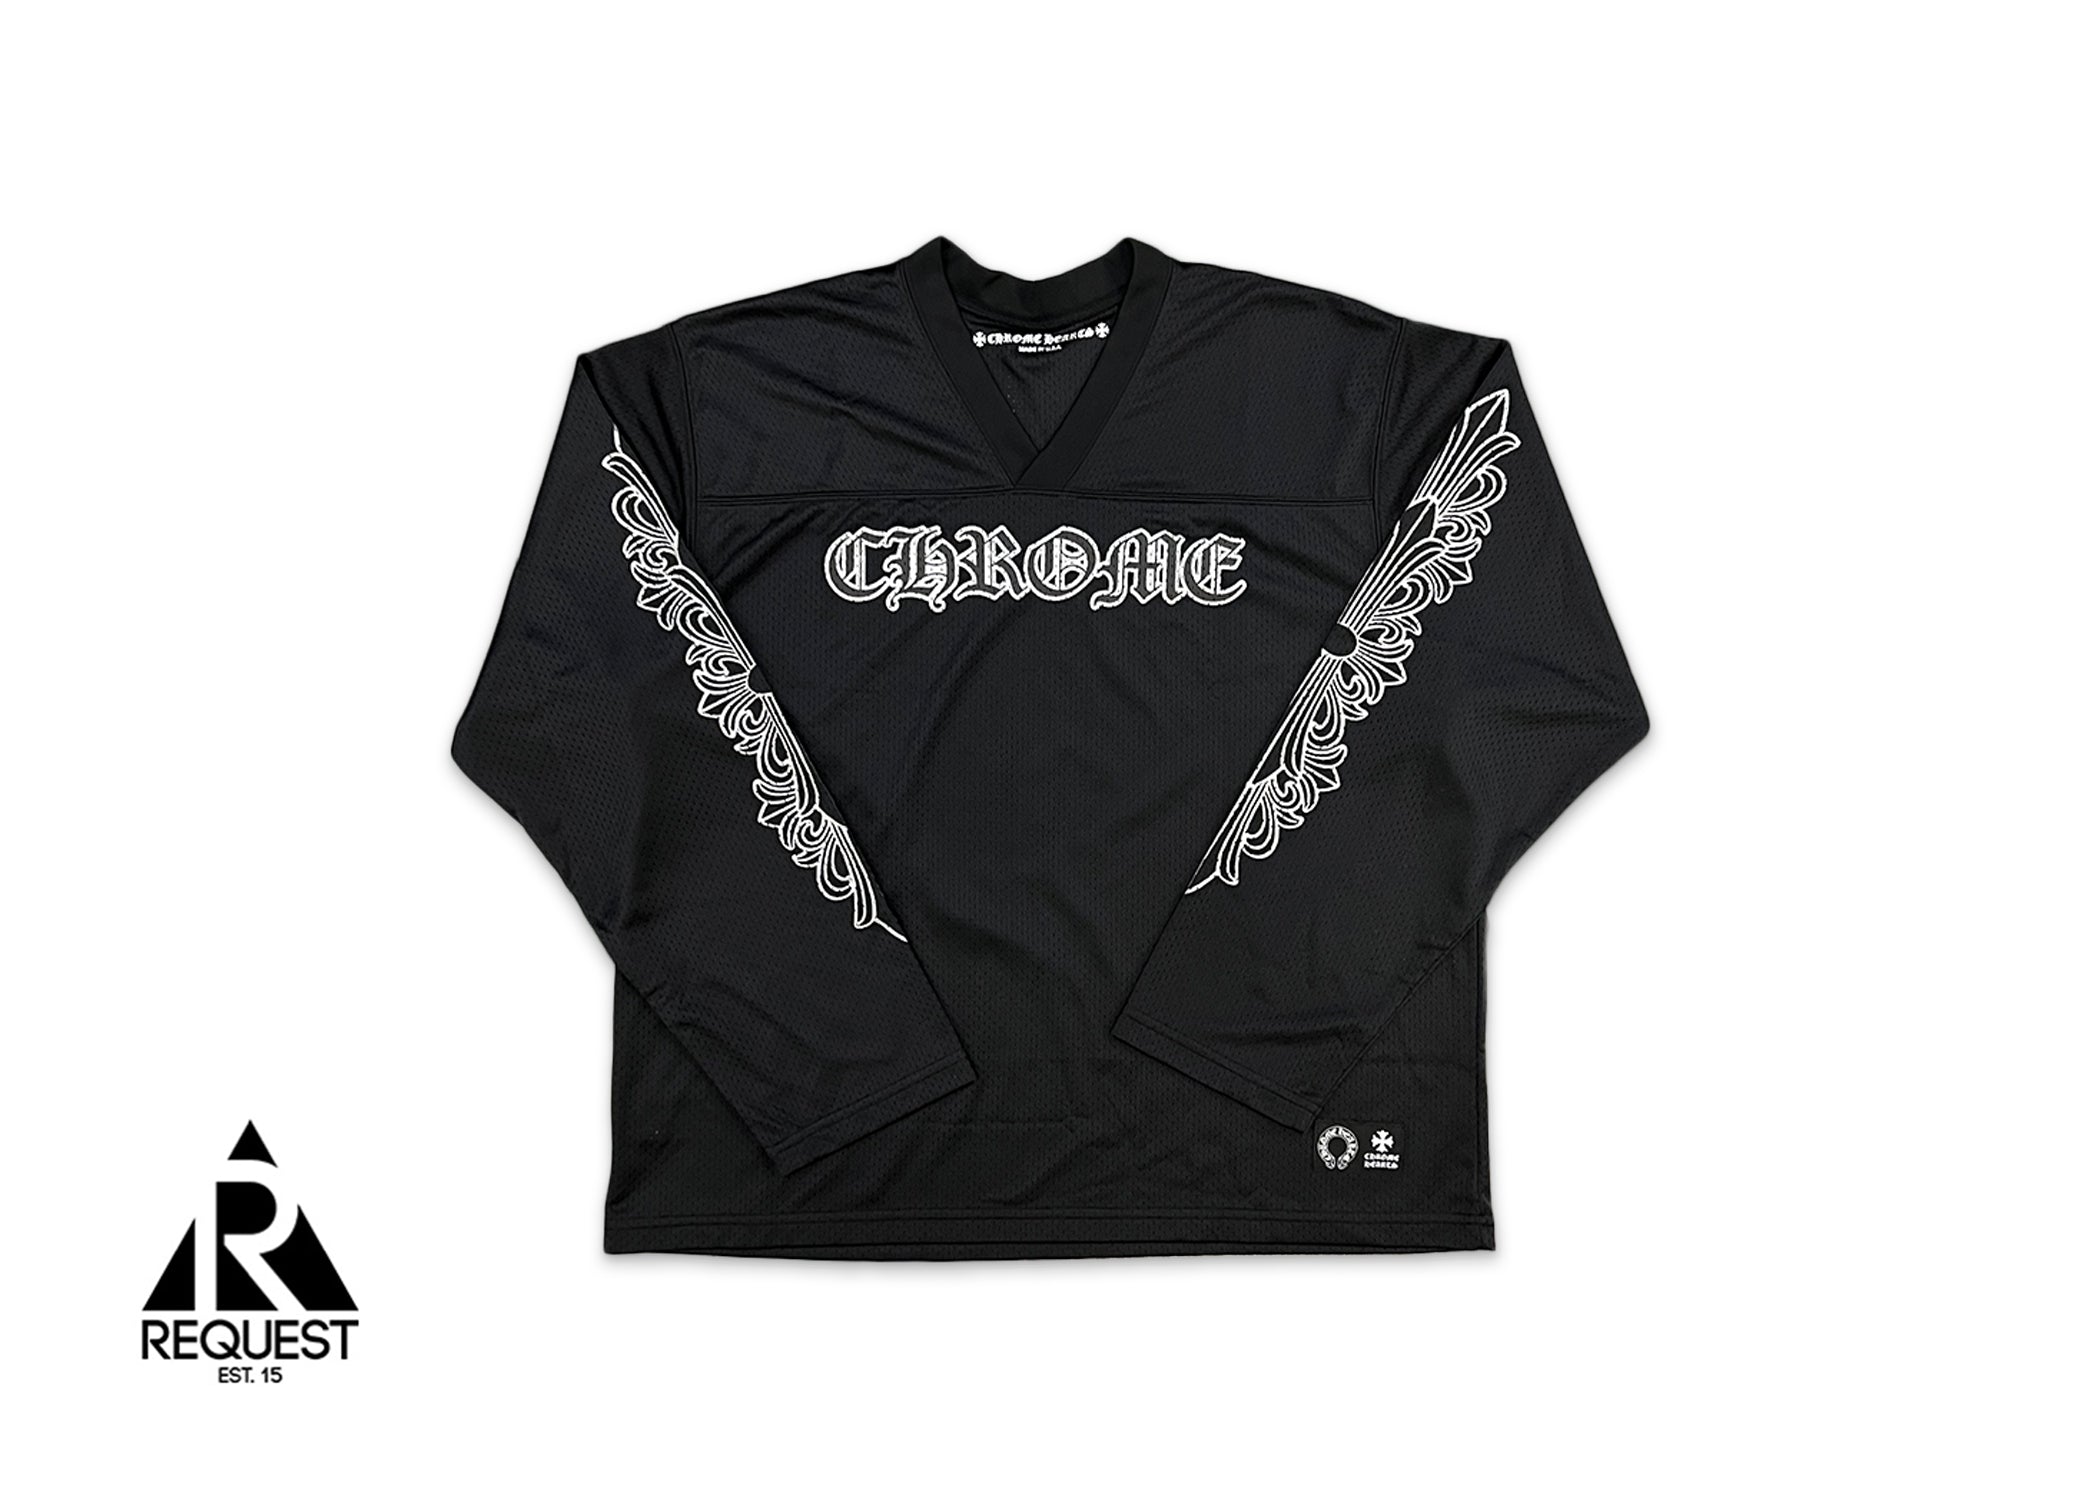 Chrome Hearts Sports Mesh Long Sleeve Warm Up Jersey “Black” | Request